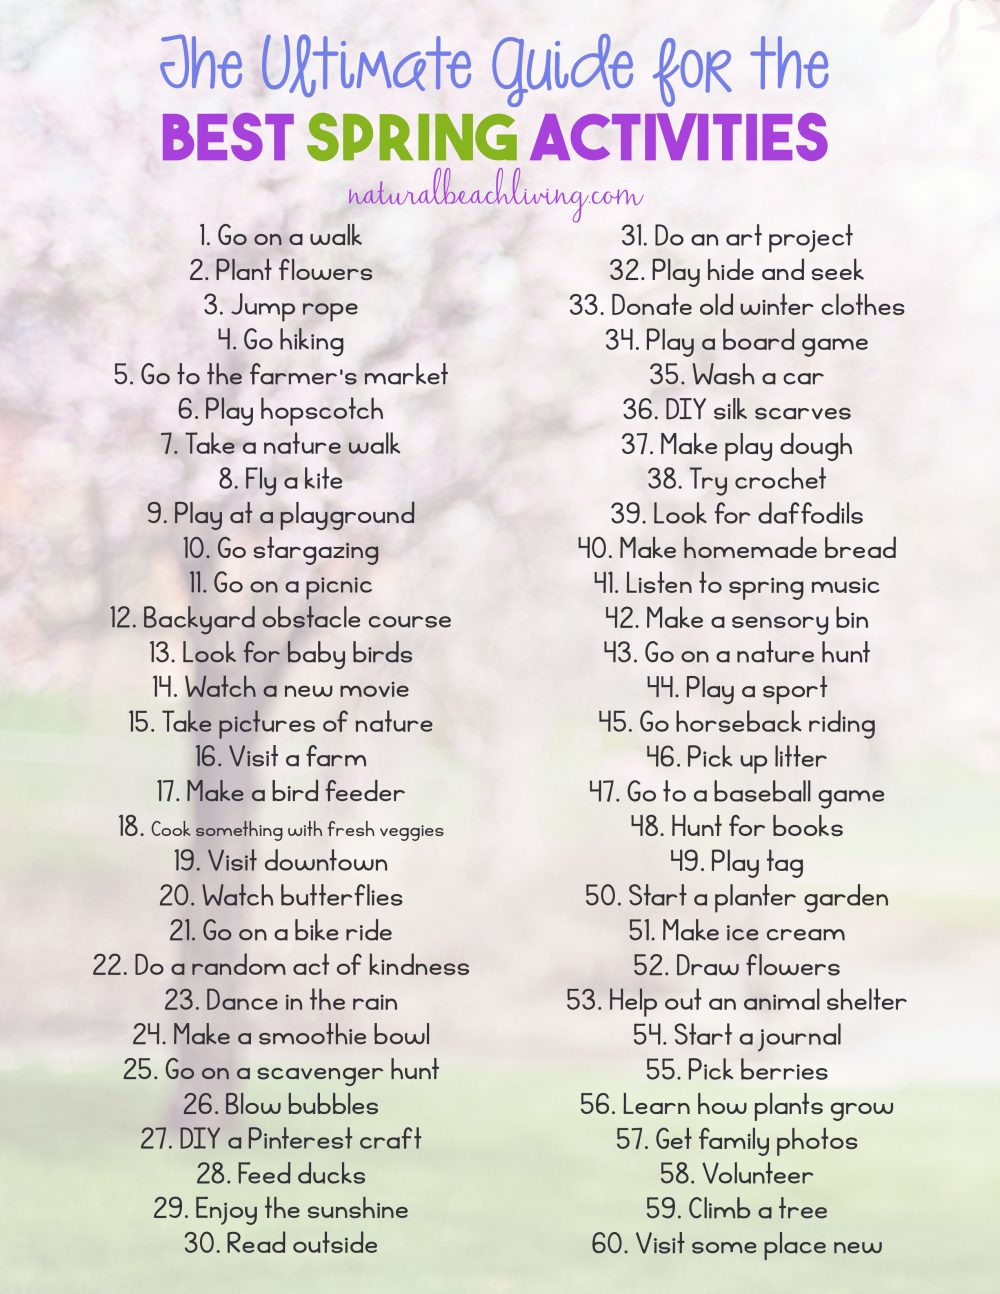 The Ultimate Guide to the Best Spring Activities – Spring Bucket List Ideas